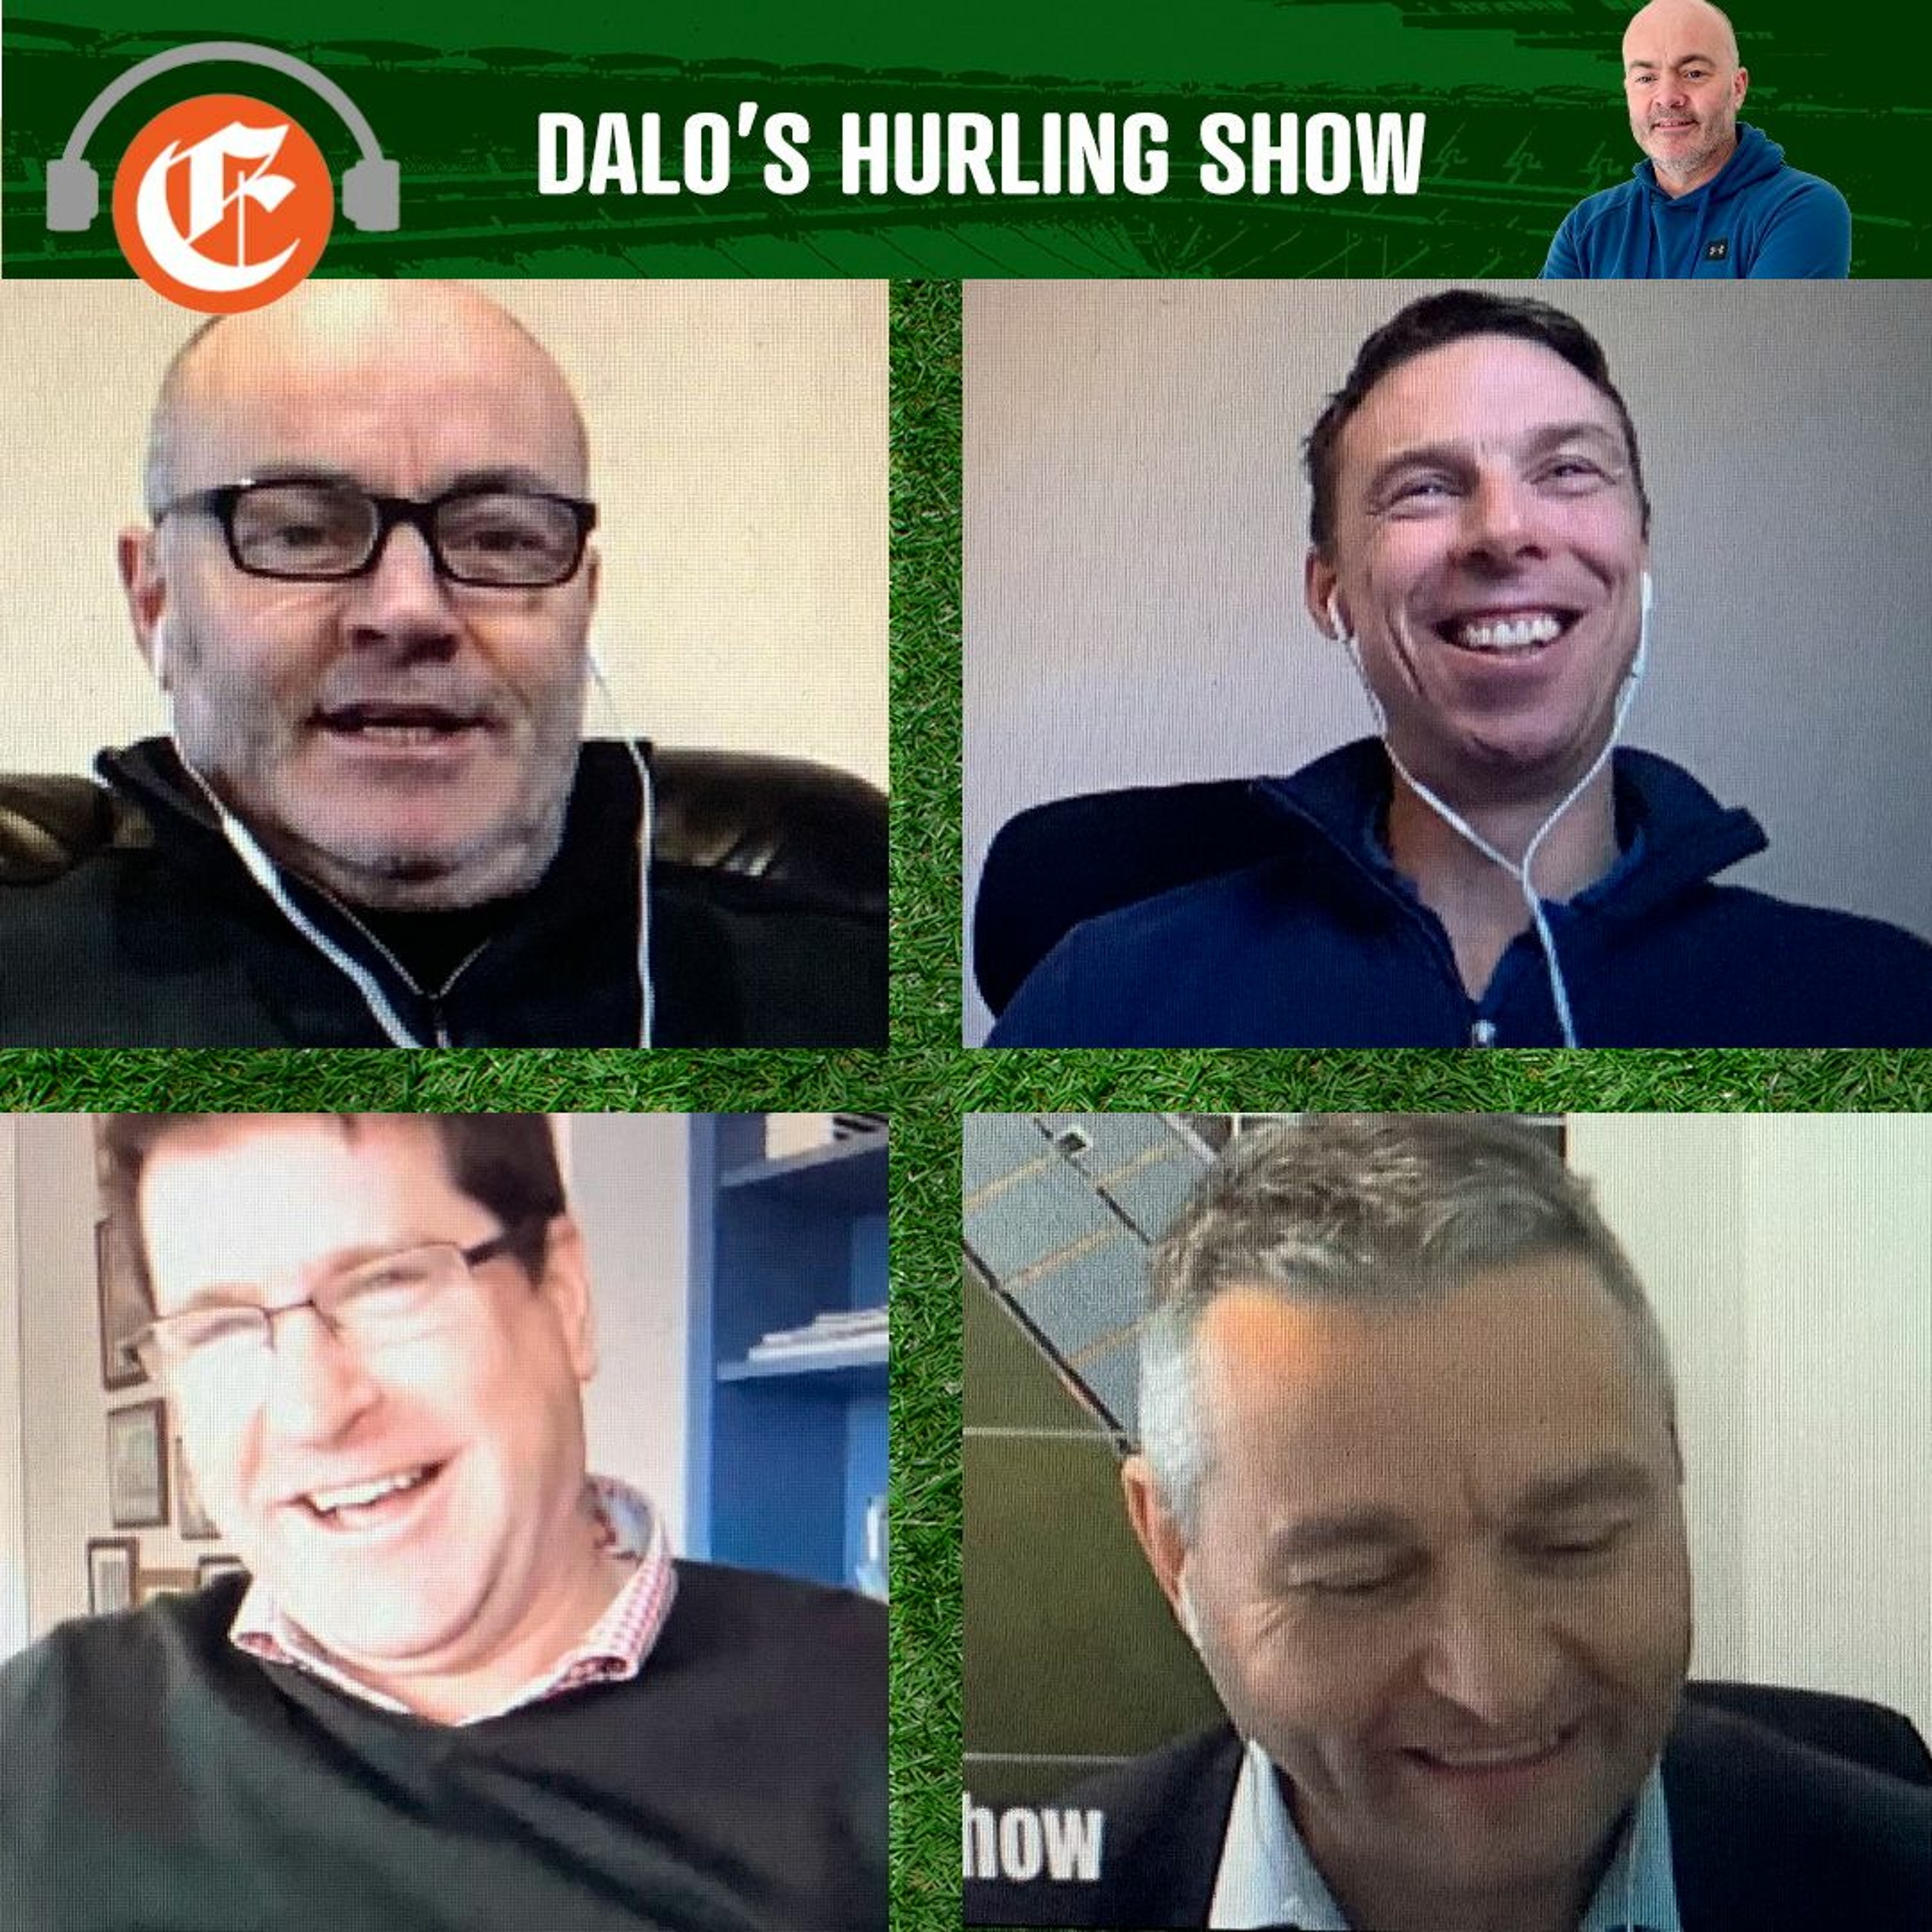 Dalo's Hurling Show: Savage club entertainment shows we've nothing to fear from split season